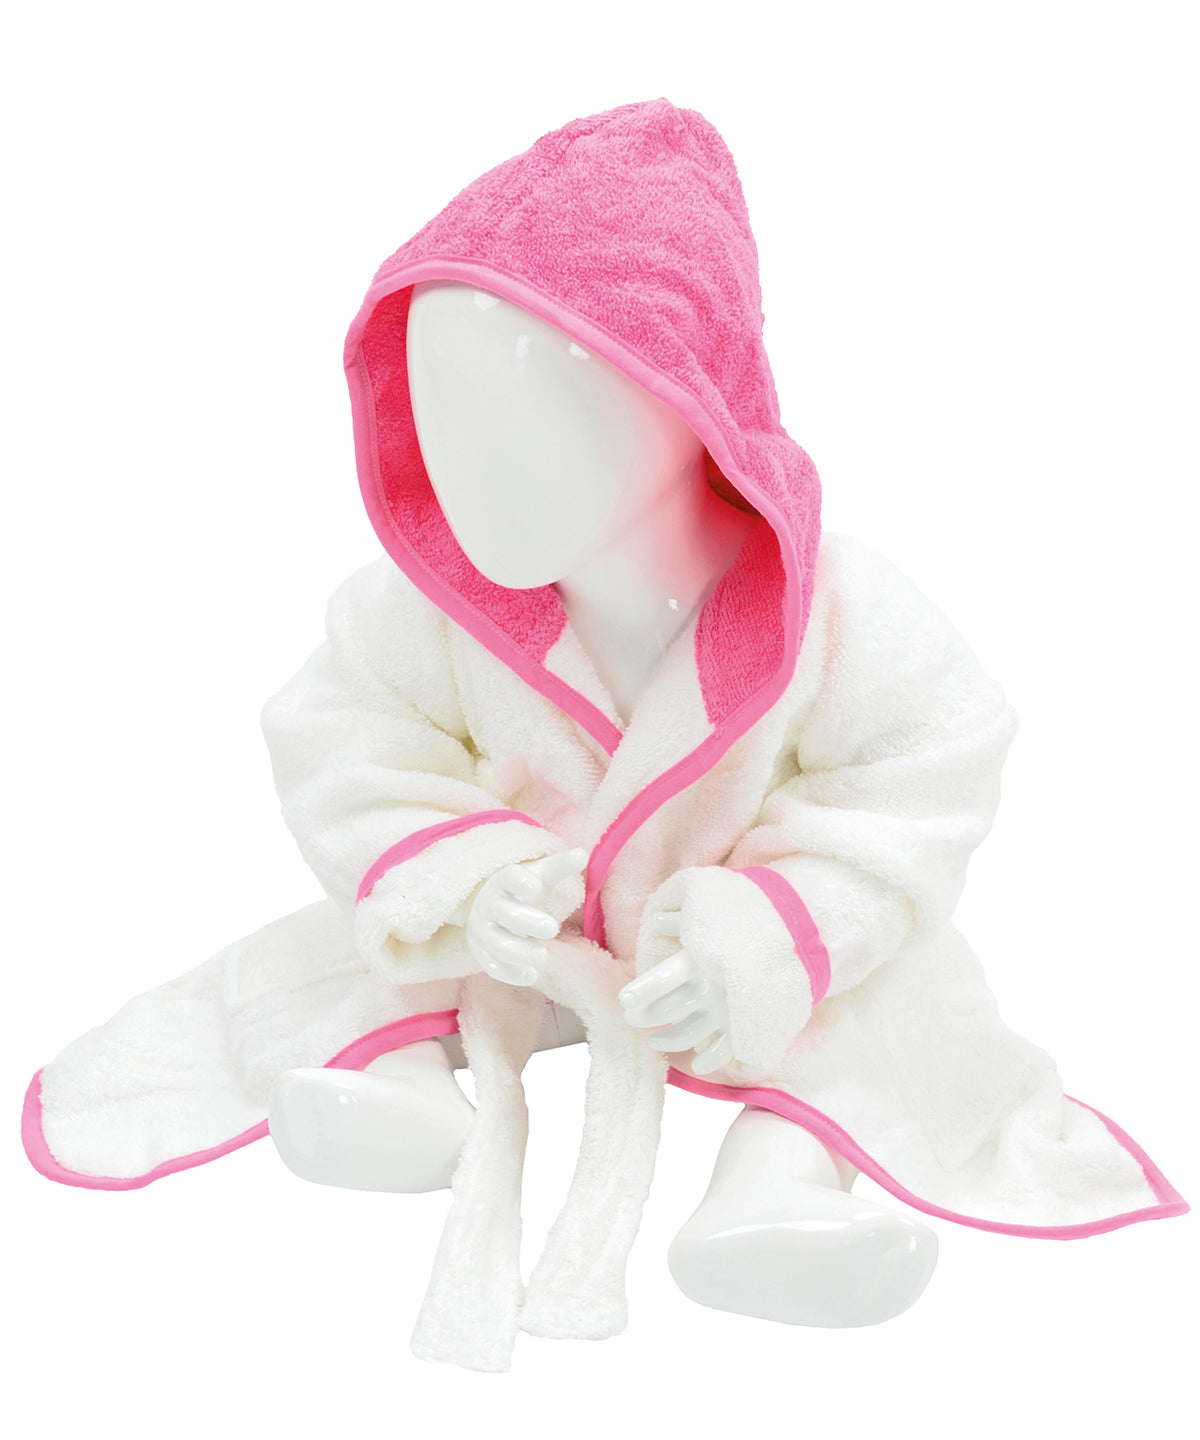 Personalised Robes - Mid Pink A&R Towels ARTG® Babiezz® hooded bathrobe